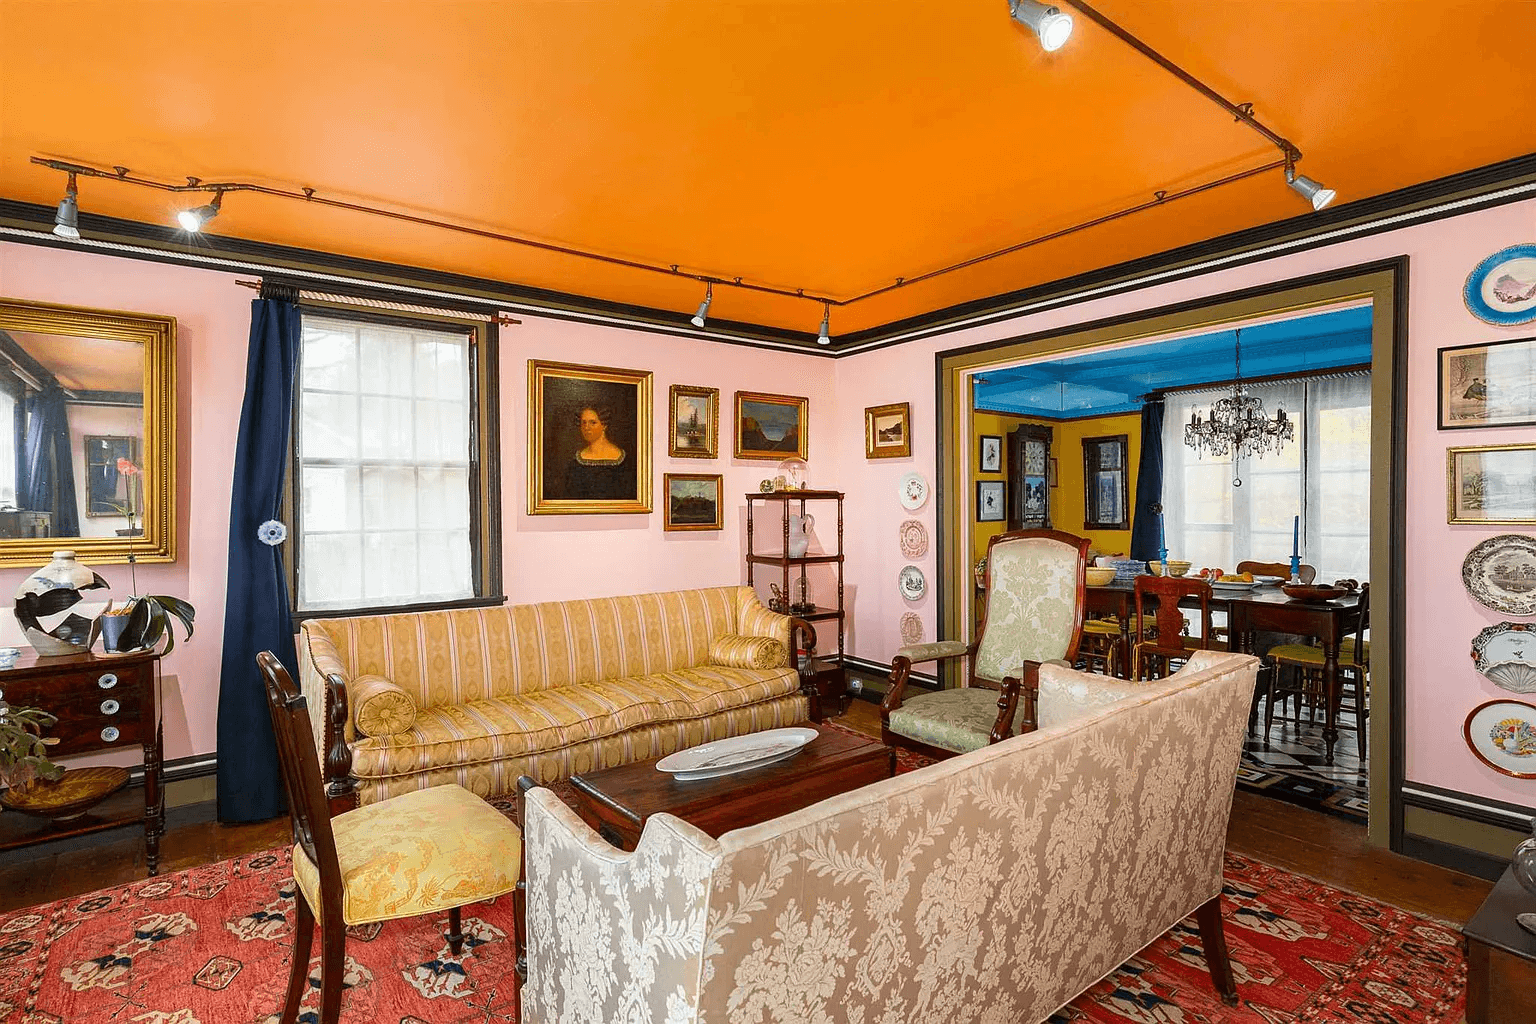 parlor with pink walls and orange ceiling and glimpse into dining room